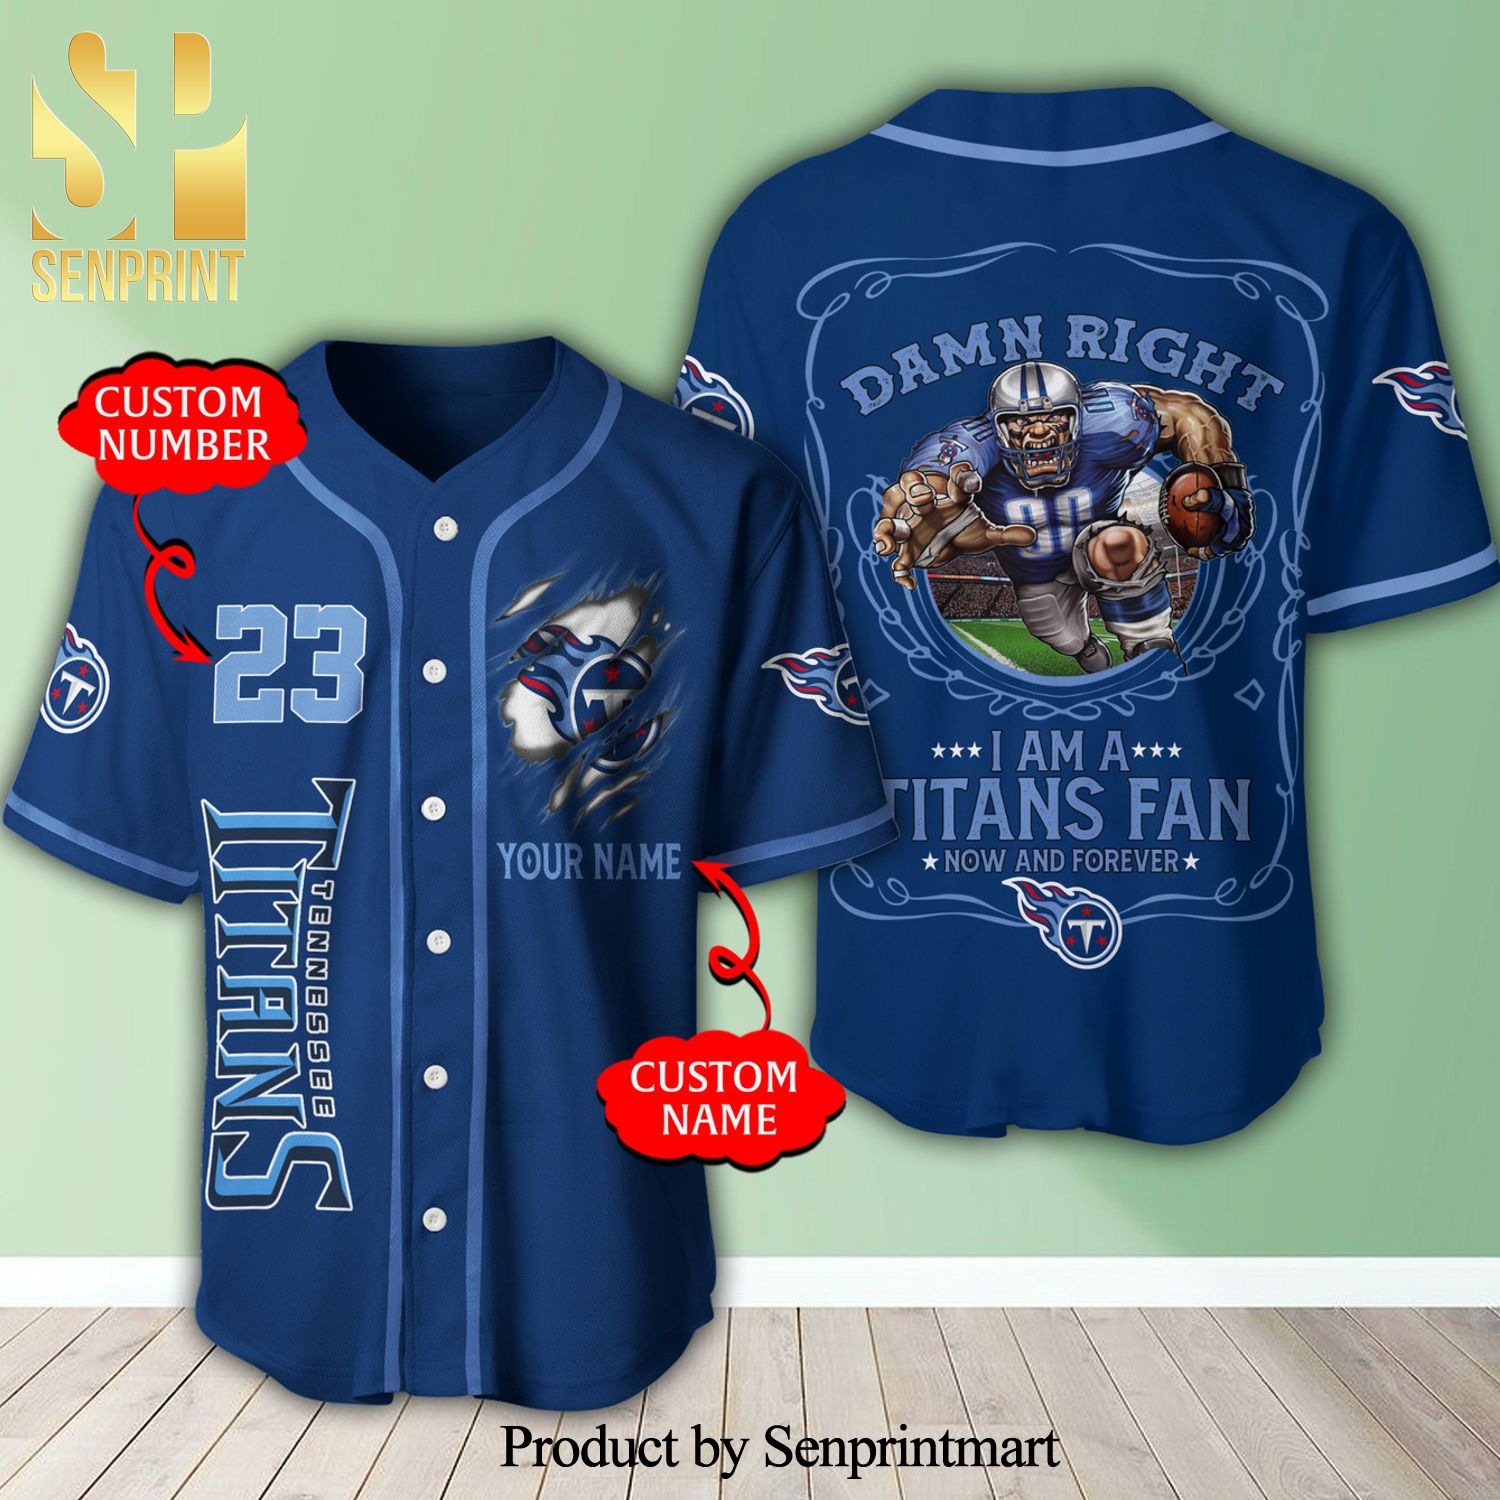 Personalized I Am A Tennessee Titans Fan Full Printing Baseball Jersey – Blue